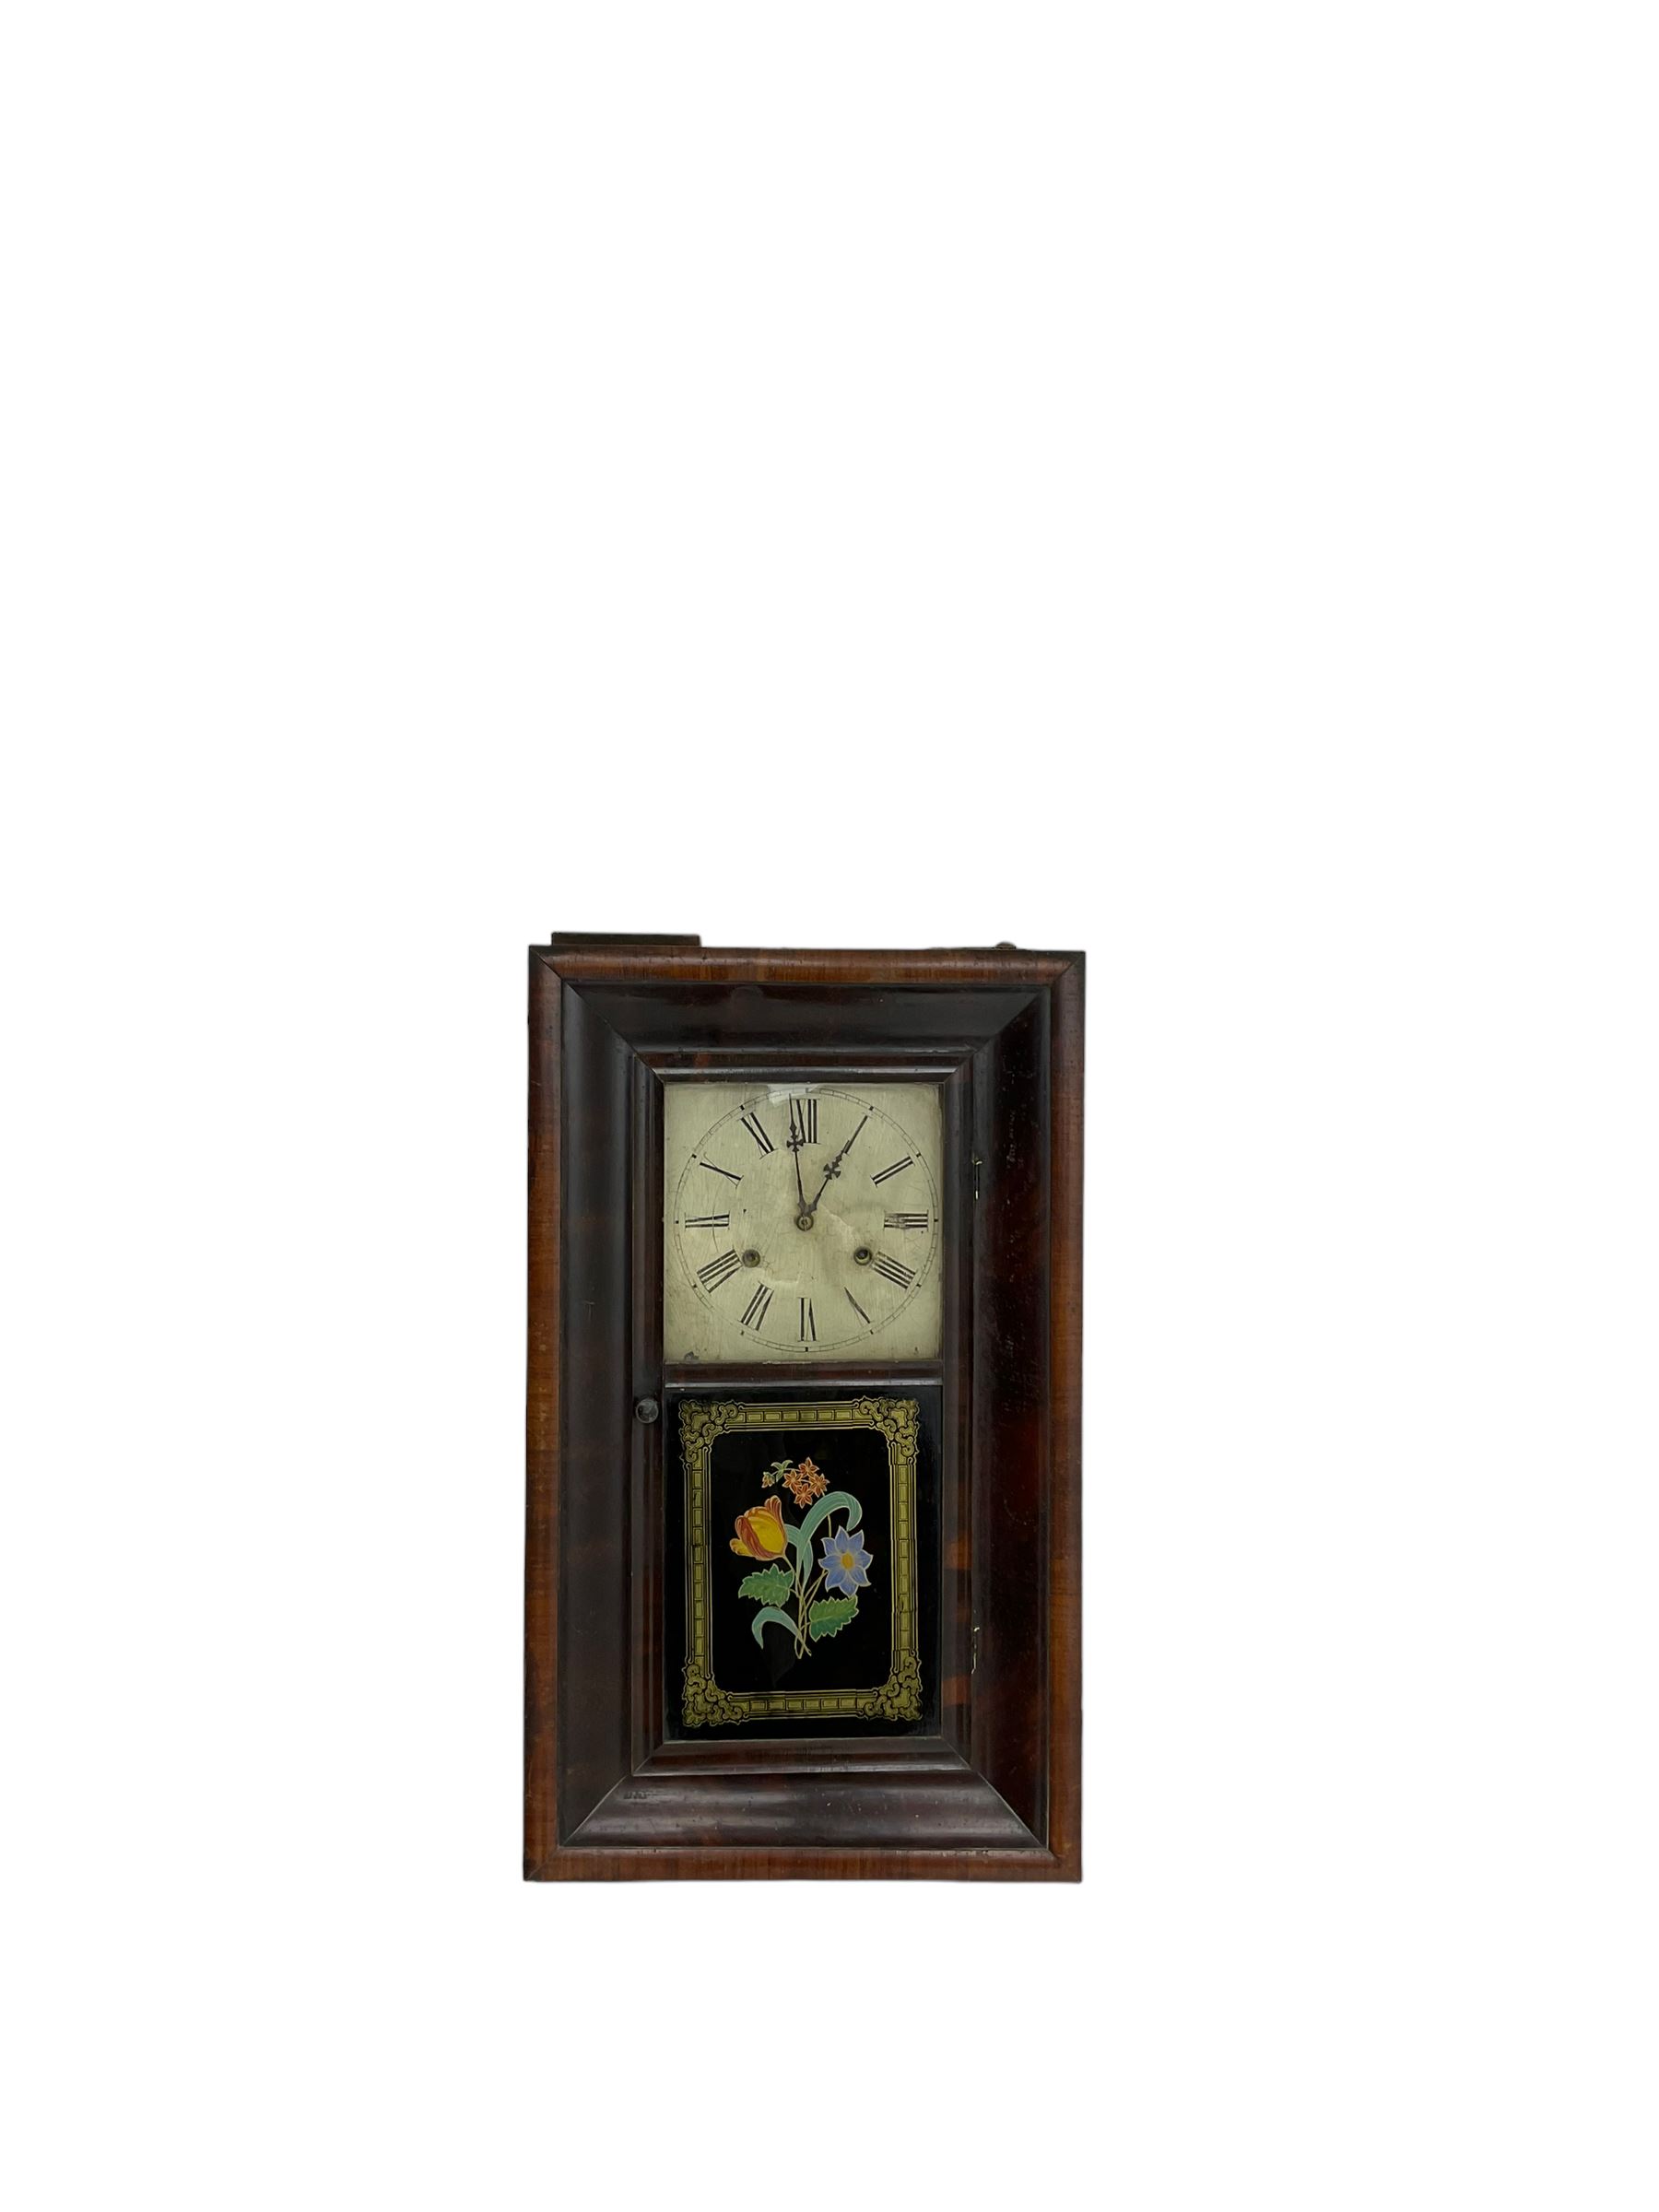 Jerome & Co - American late 19th century 30 hr weight driven mahogany wall clock - Image 2 of 4